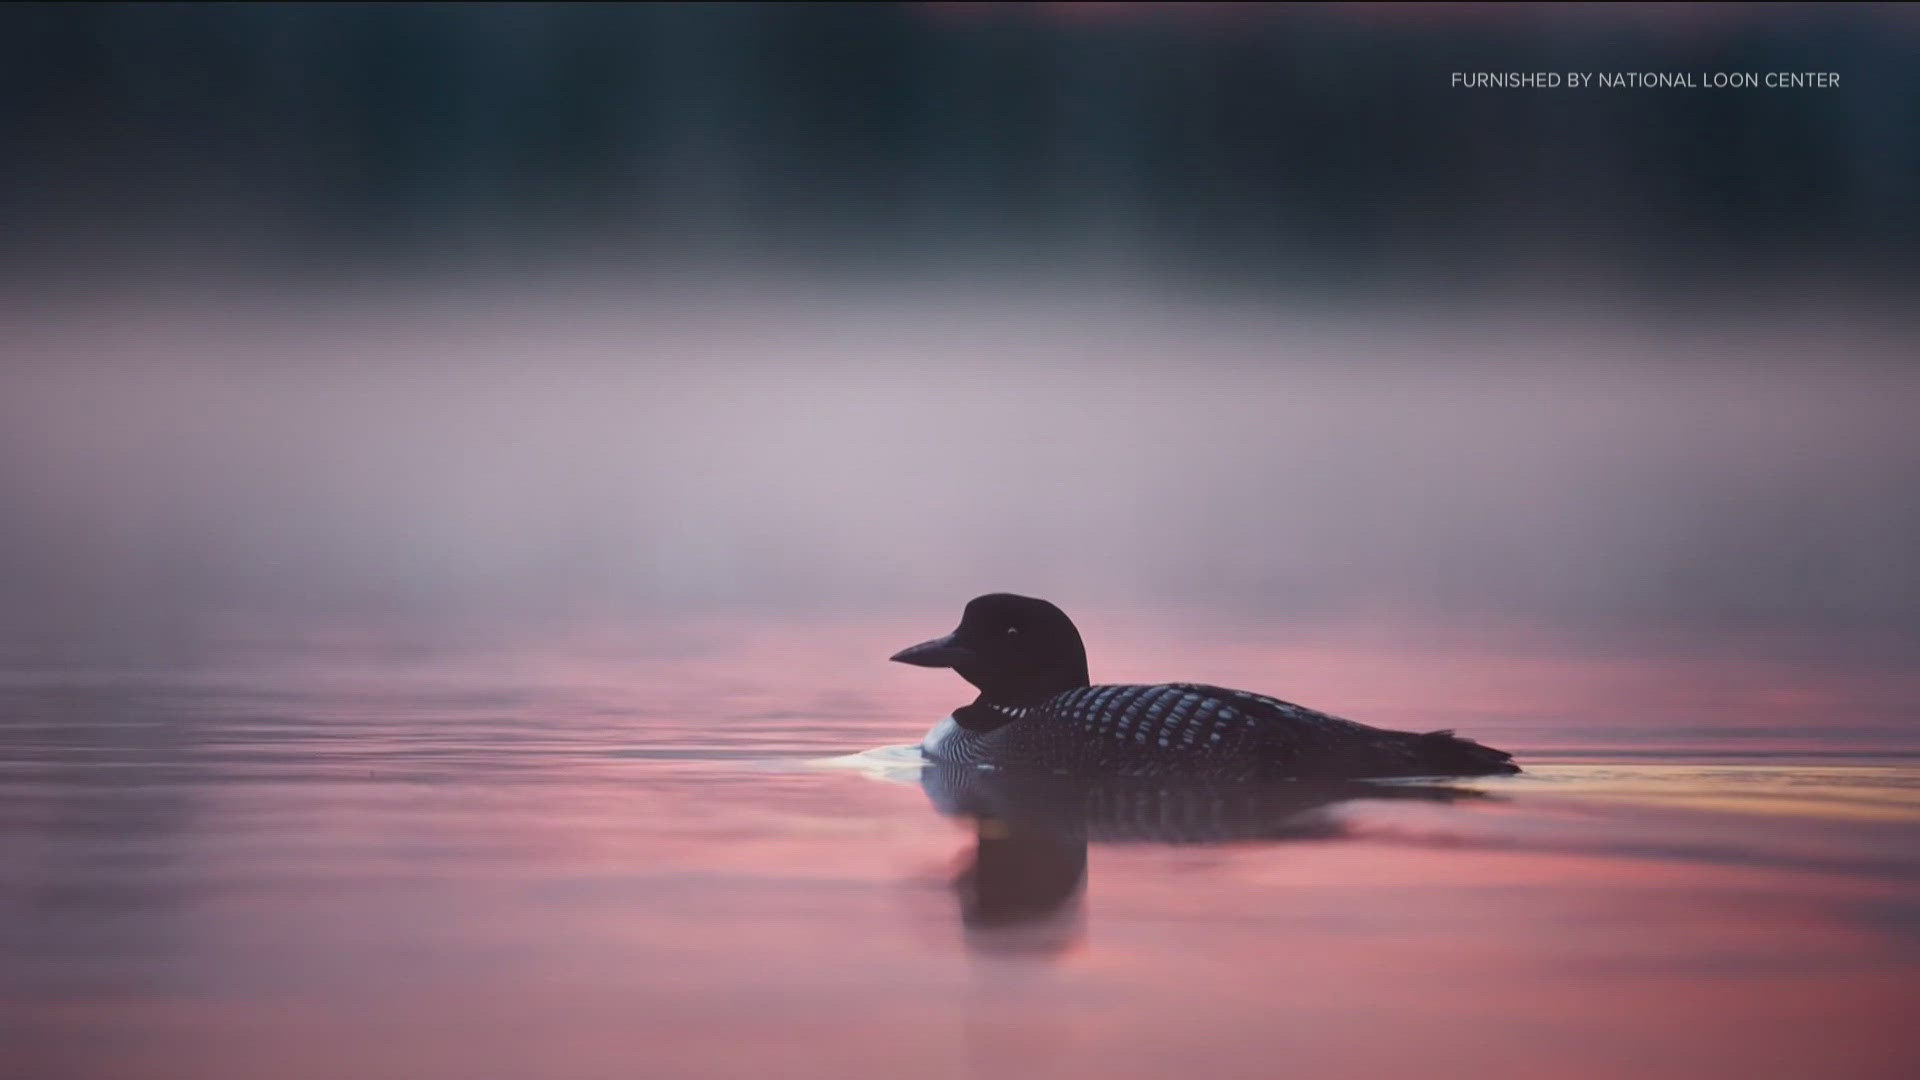 According to Minnesota Pollution Control, an estimated 25 percent of adult loons die from lead poisoning.